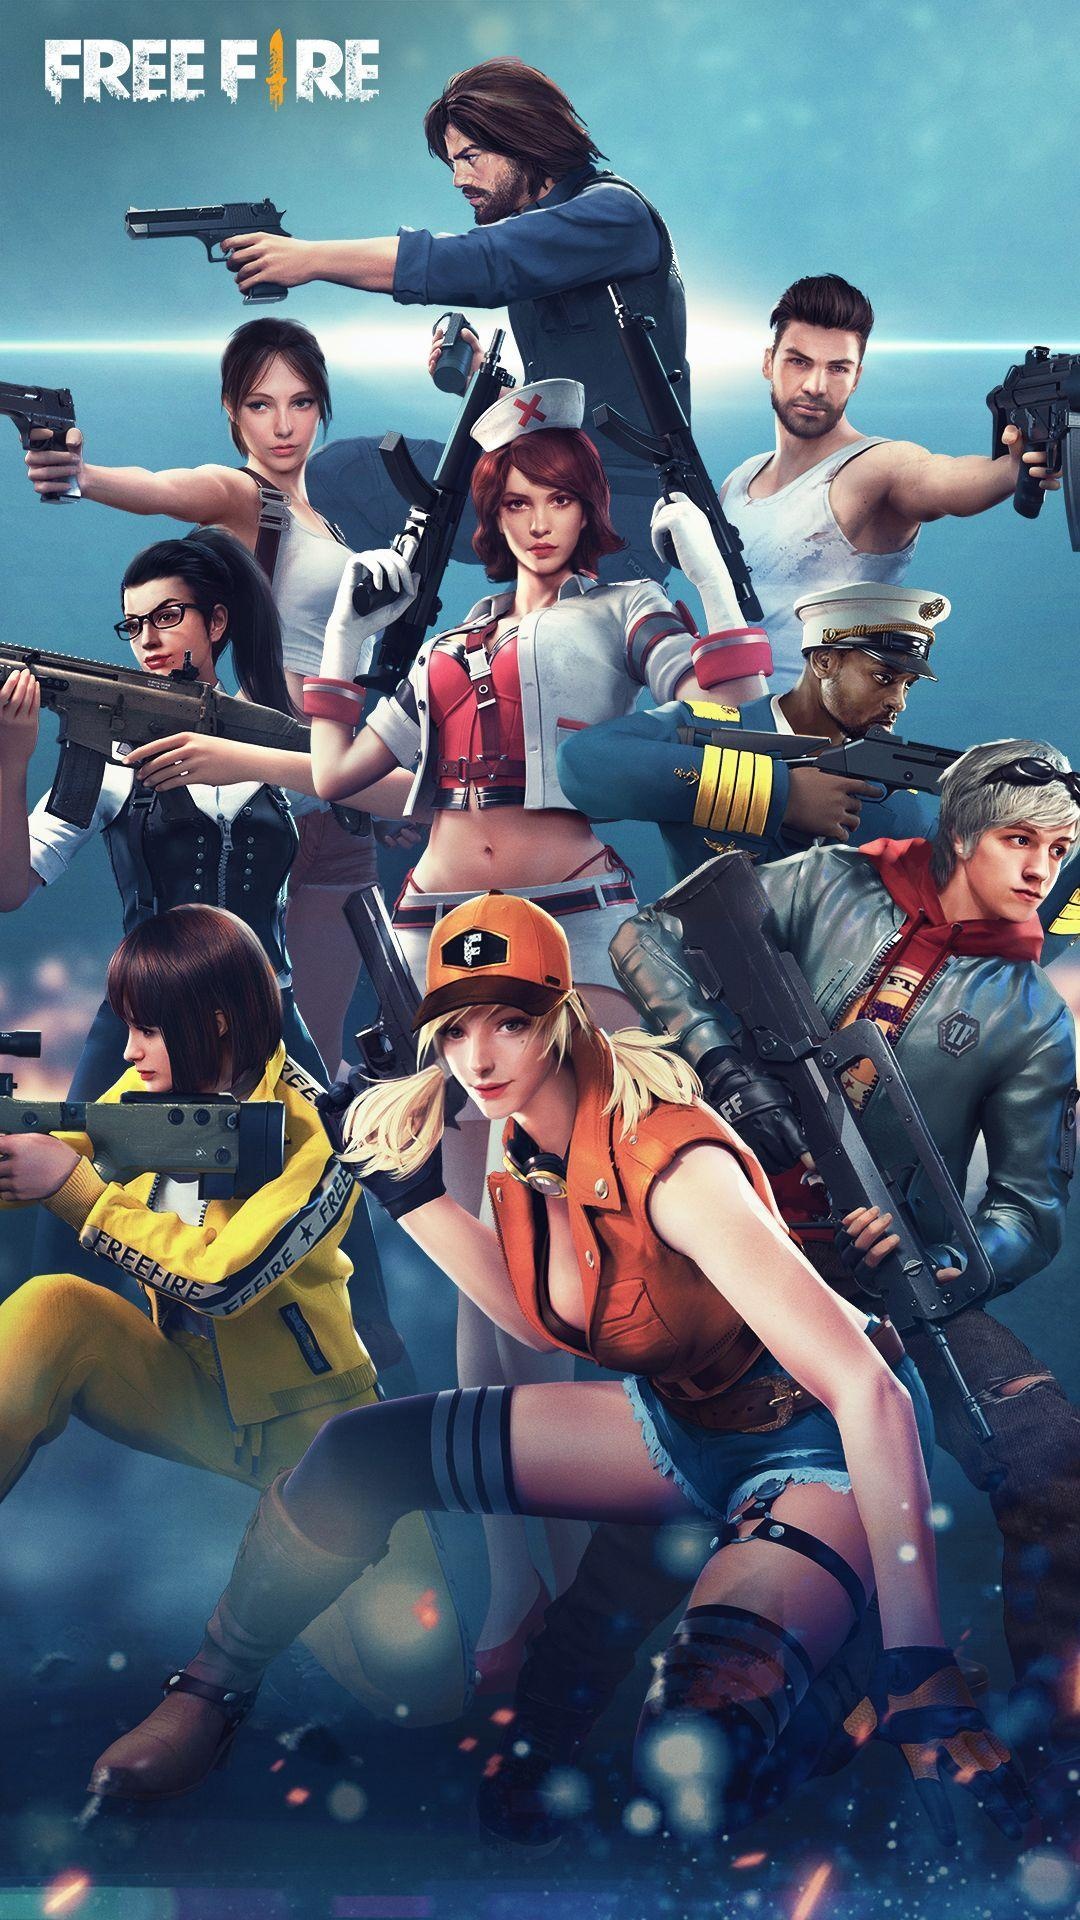 Free Fire character, Striking wallpapers, Unique abilities, Iconic poses, 1080x1920 Full HD Phone